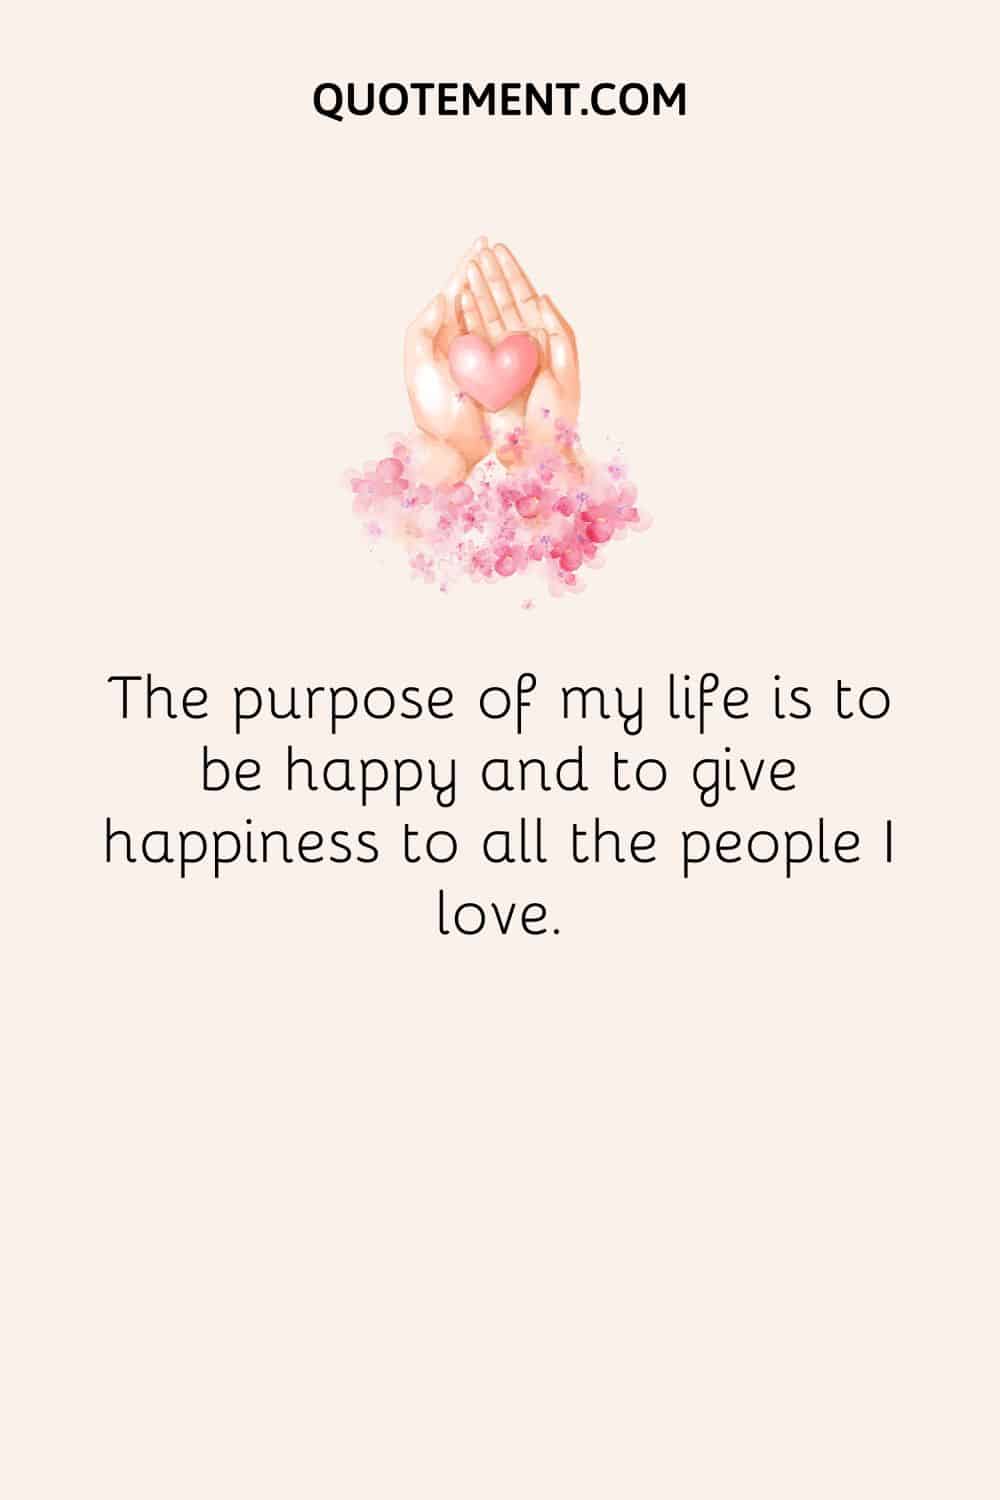 The purpose of my life is to be happy and to give happiness to all the people I love